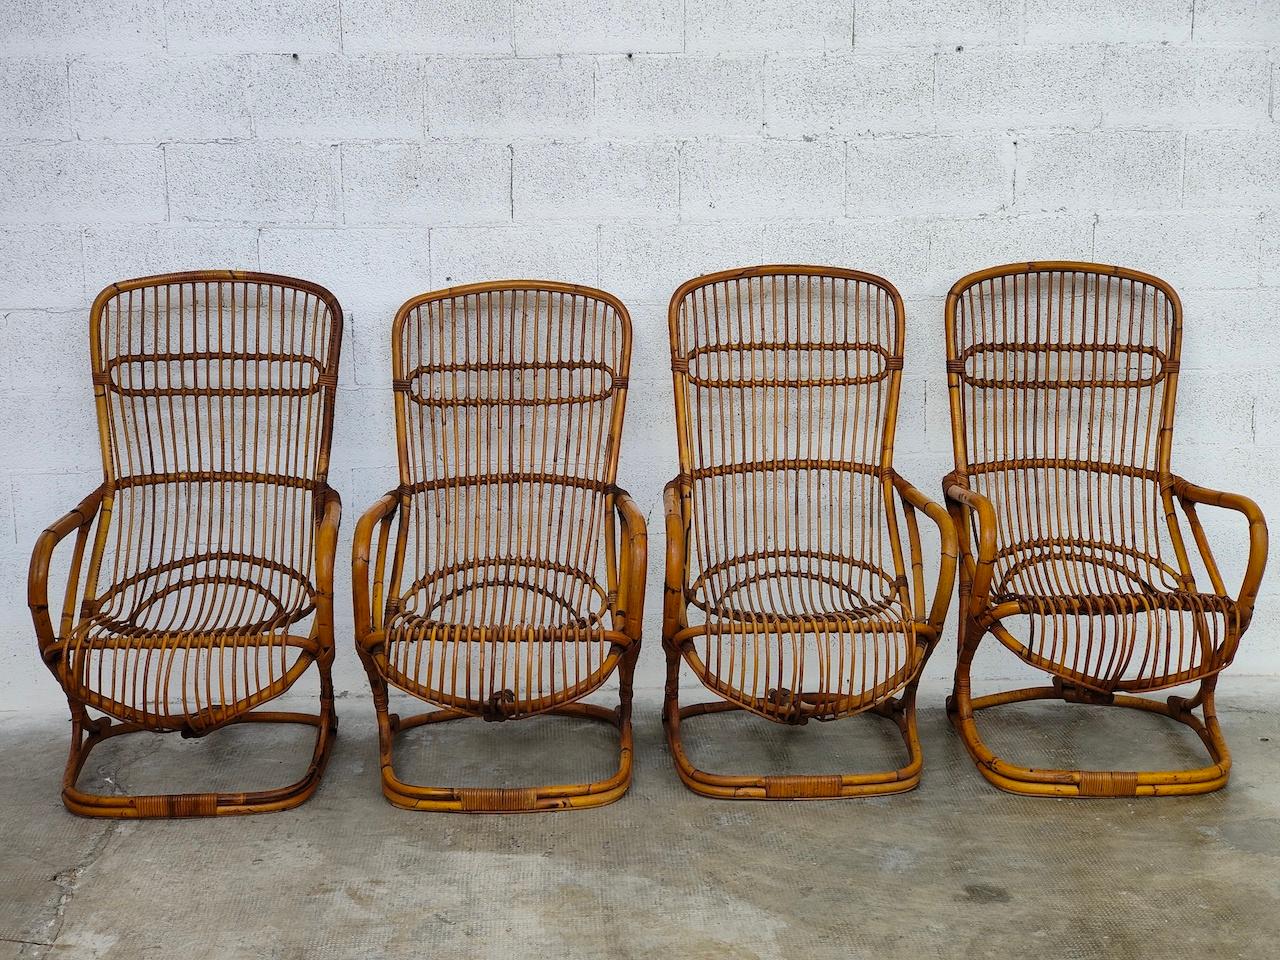 Set of 4 rattan armchairs and a coffee table by Tito Agnoli for Bonacina - Italy In Good Condition For Sale In Padova, IT